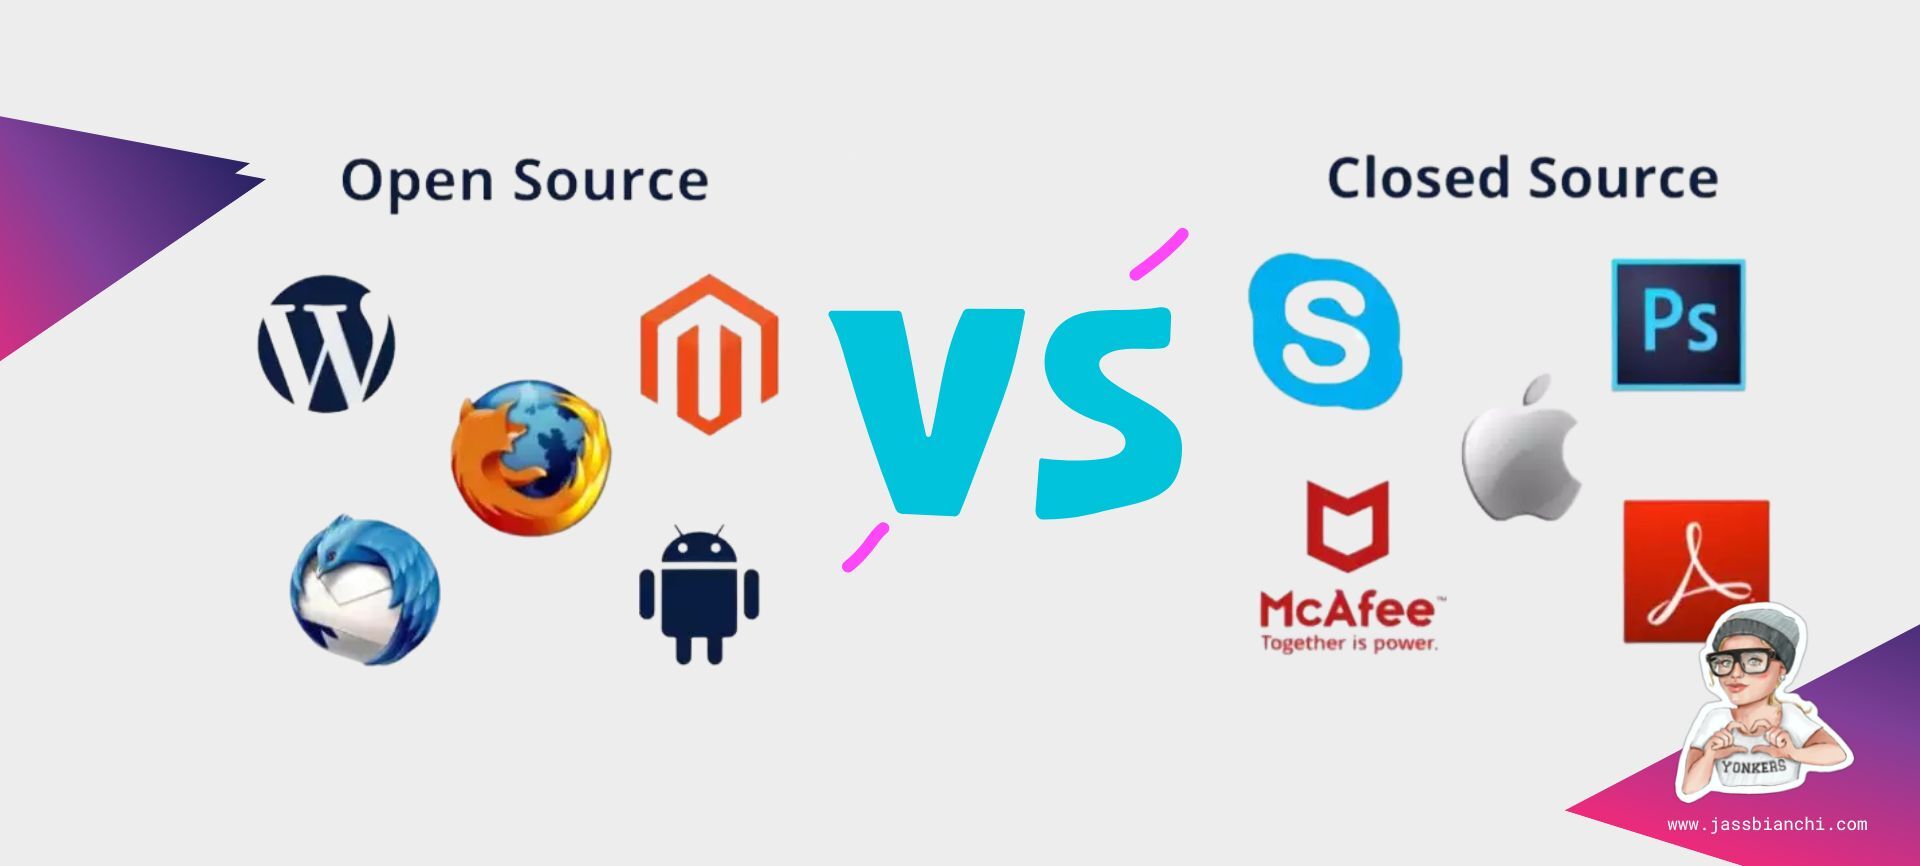 Open Source vs Closed Source: What's The Difference? 